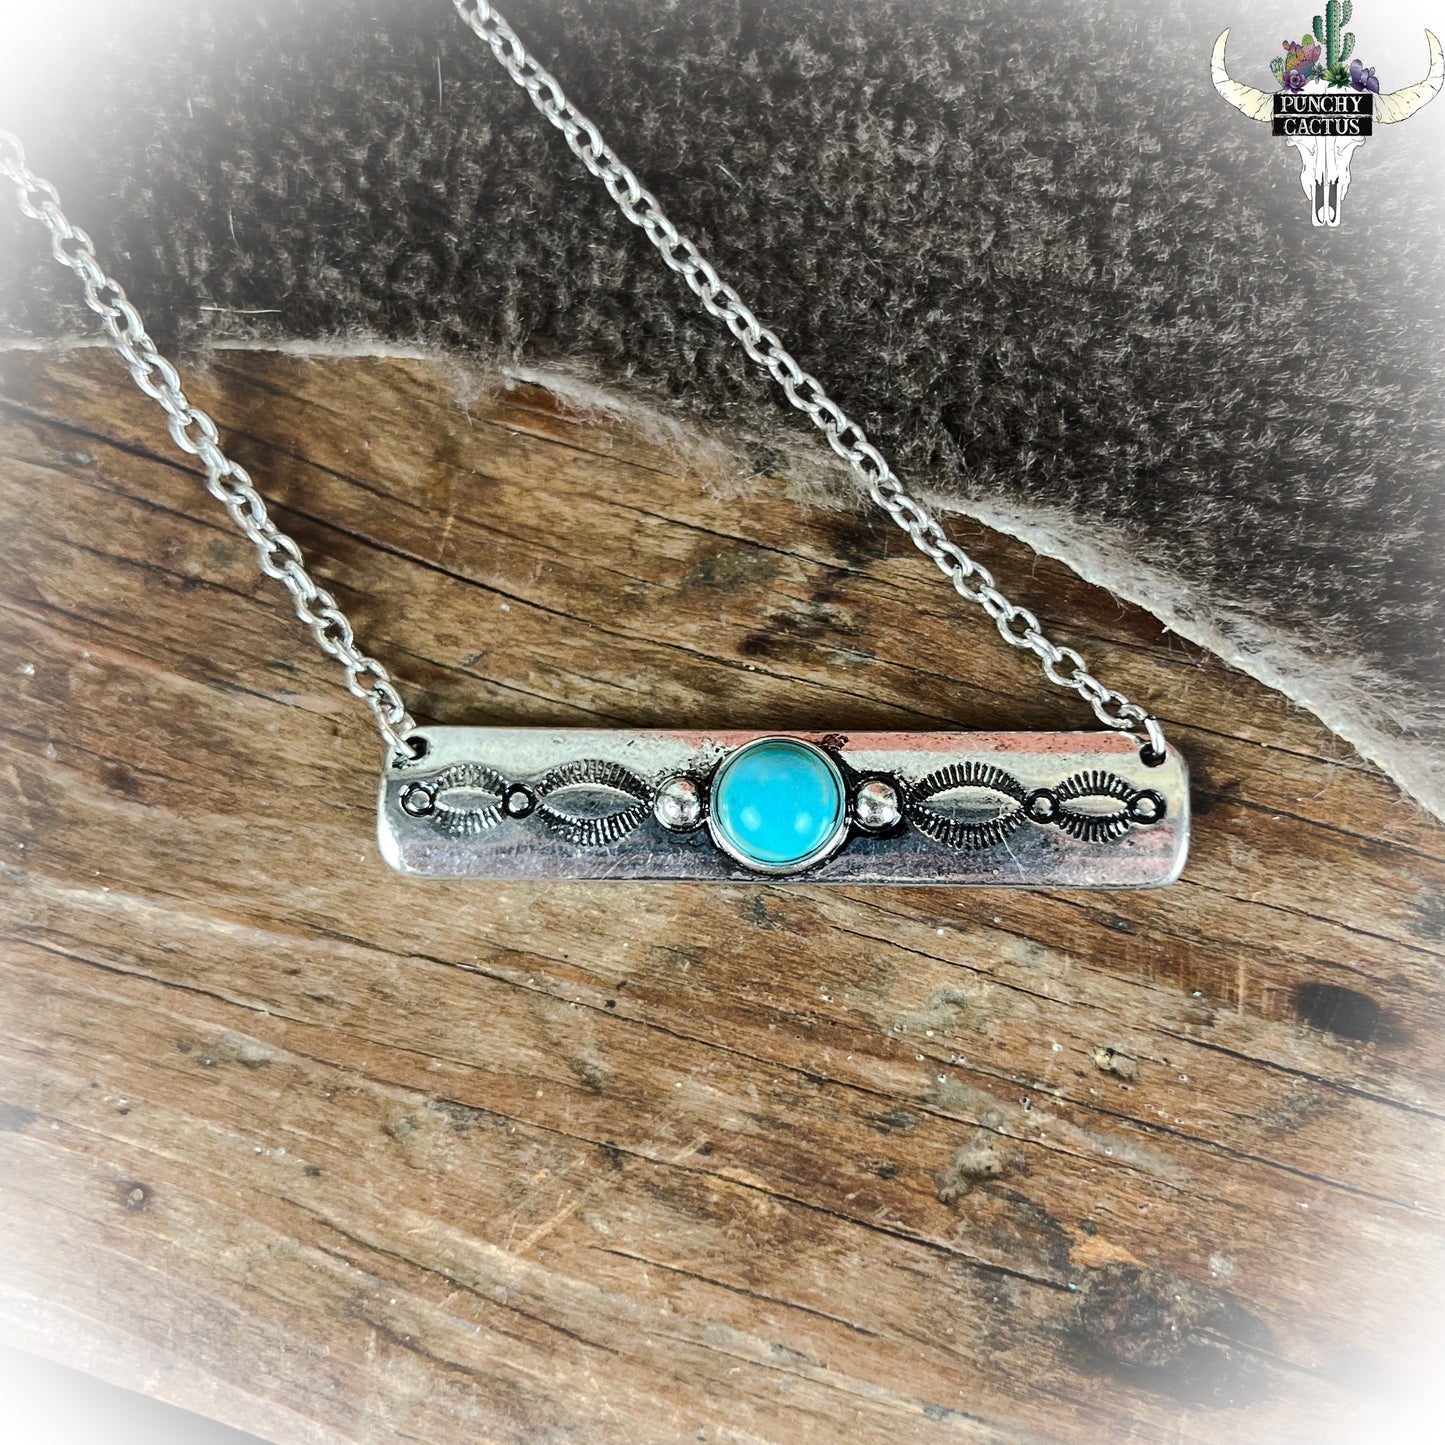 Save It - Western Bar Necklace